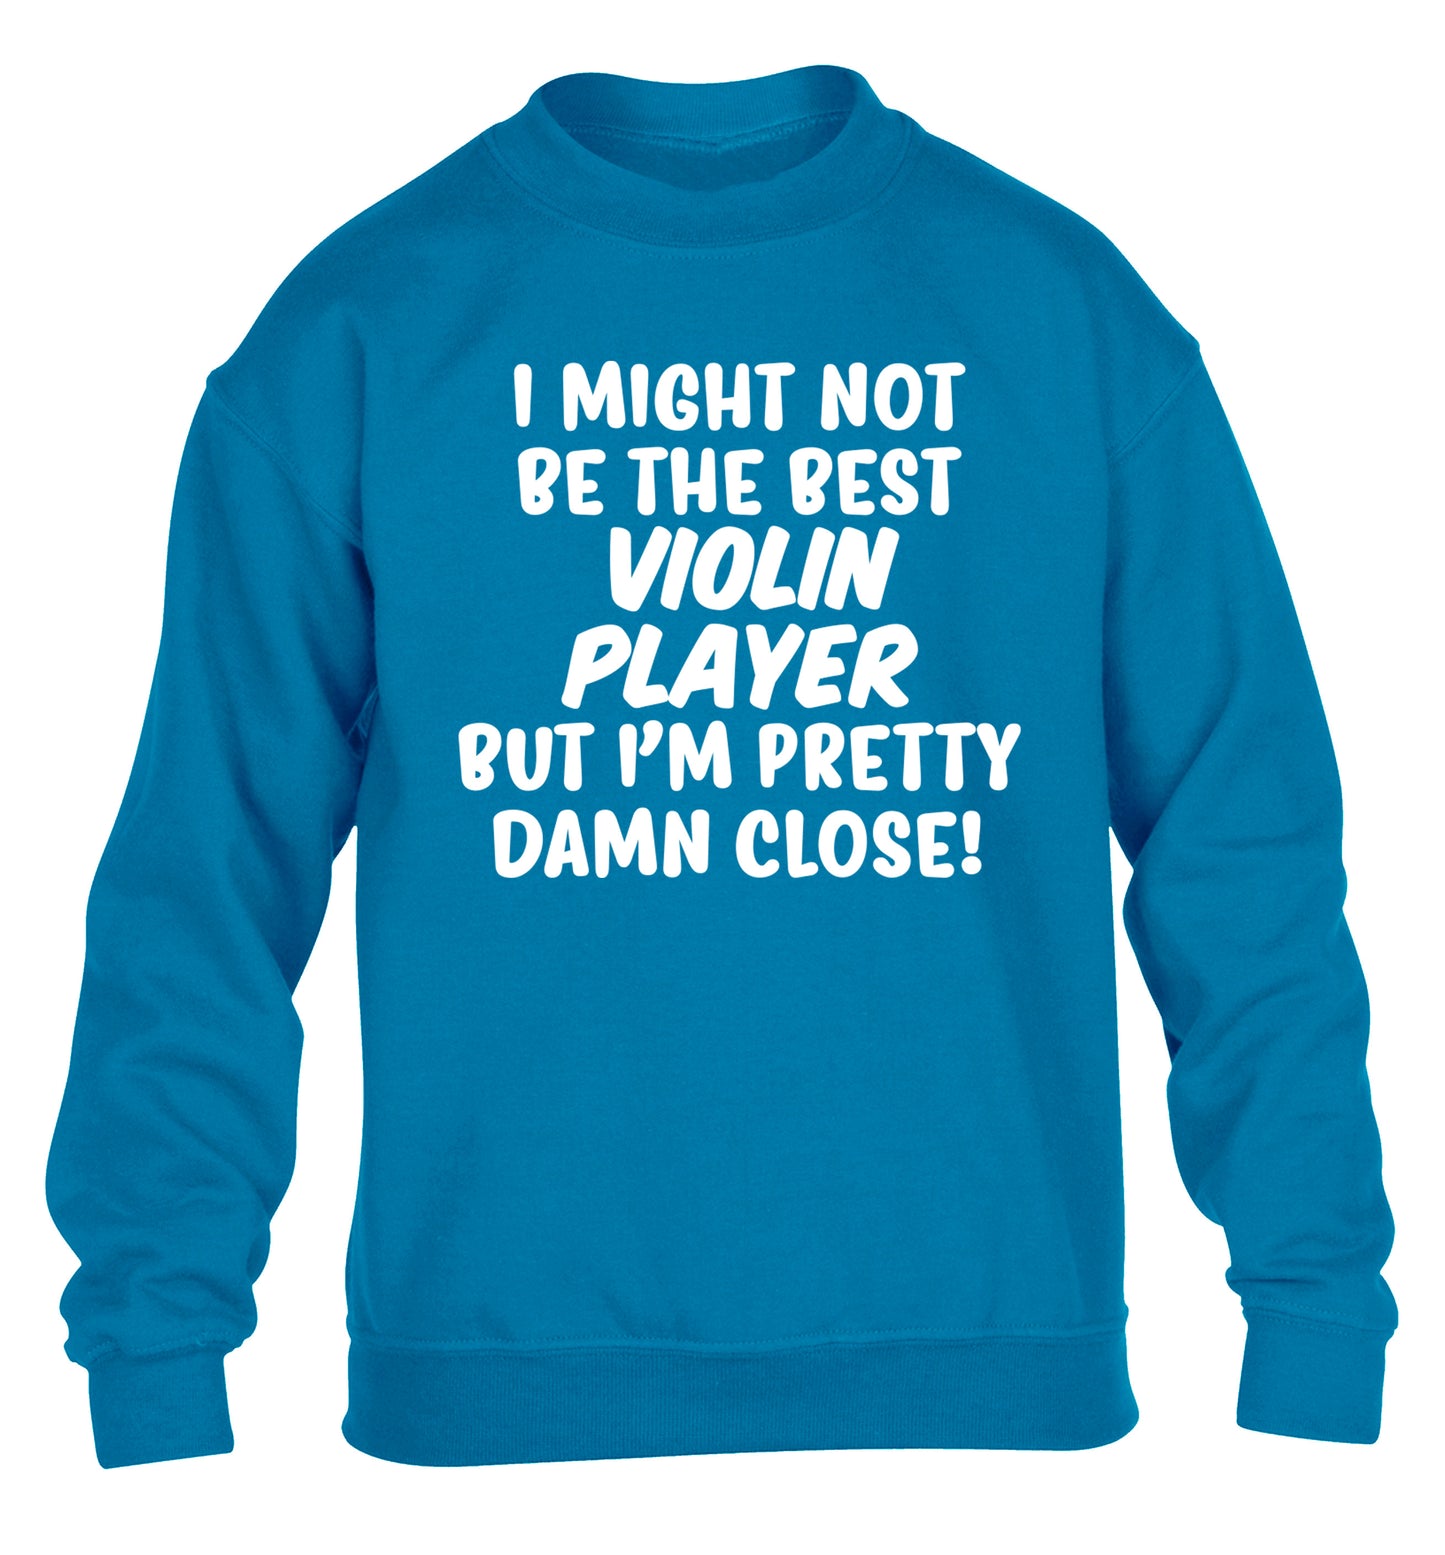 I might not be the best violin player but I'm pretty close children's blue sweater 12-13 Years